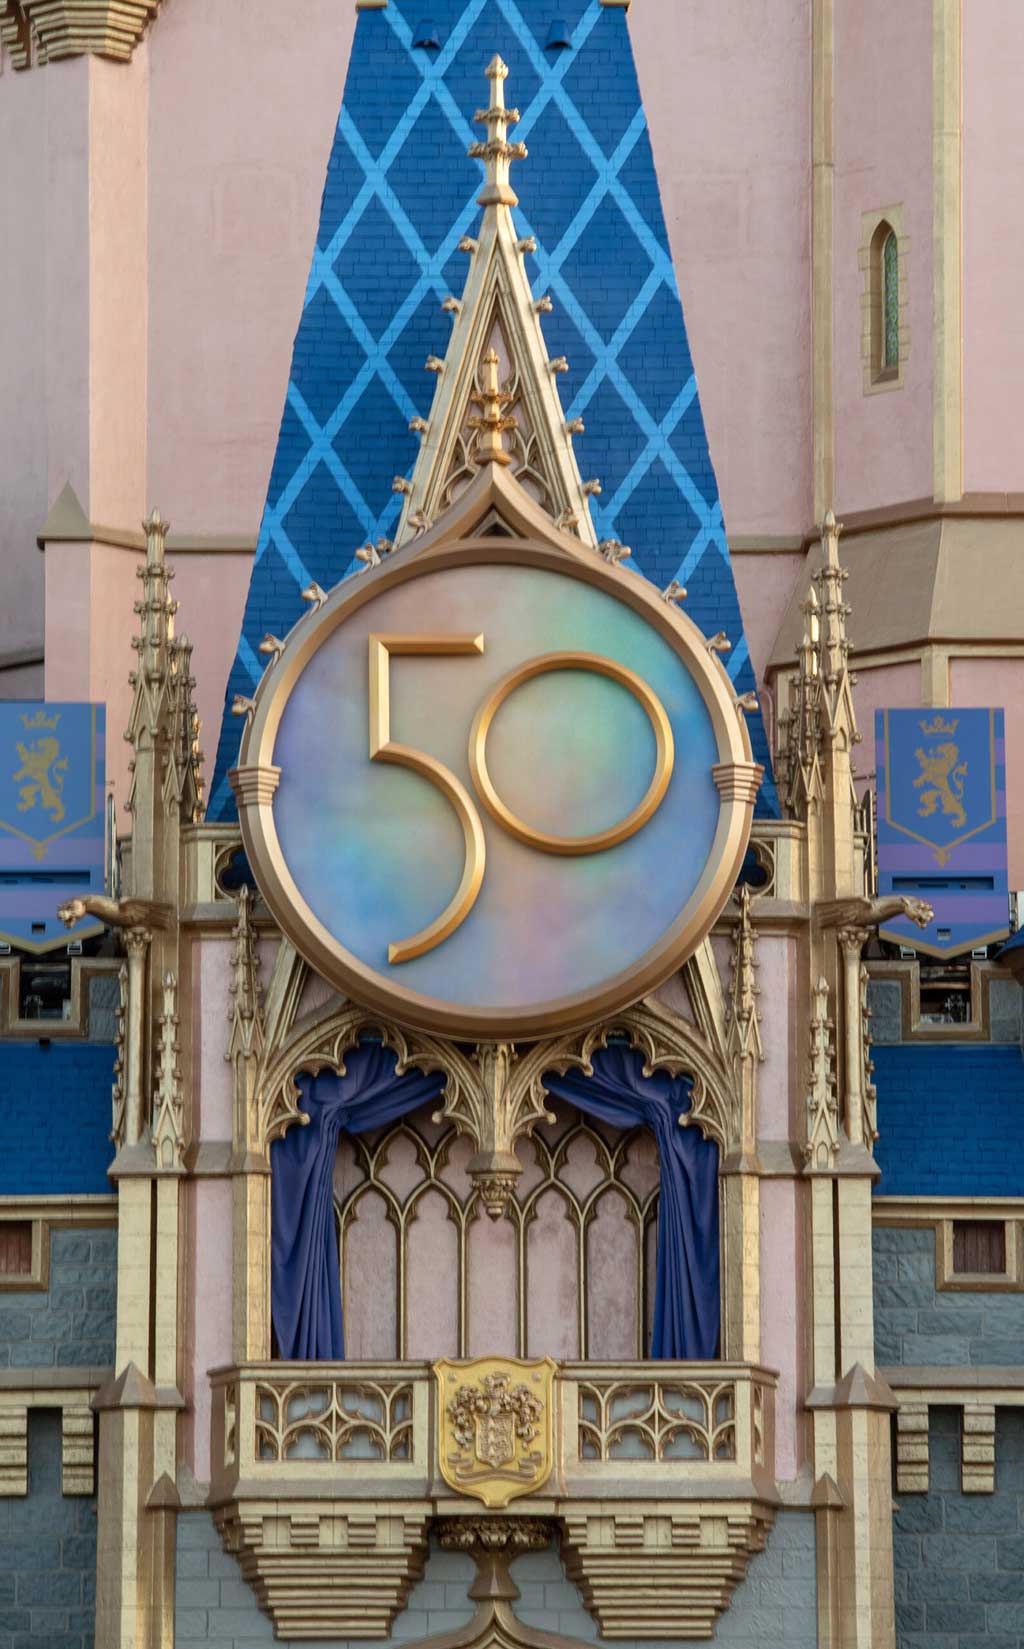 A new crest honoring the 50th anniversary of Walt Disney World Resort adorns Cinderella Castle at Magic Kingdom Park in Lake Buena Vista, Fla. The crest completes the castle’s royal, EARidescent makeover, joining gold bunting, sparkling embellishments and other new enhancements leading up to “The World’s Most Magical Celebration” beginning Oct. 1, 2021. (Kent Phillips, photographer)